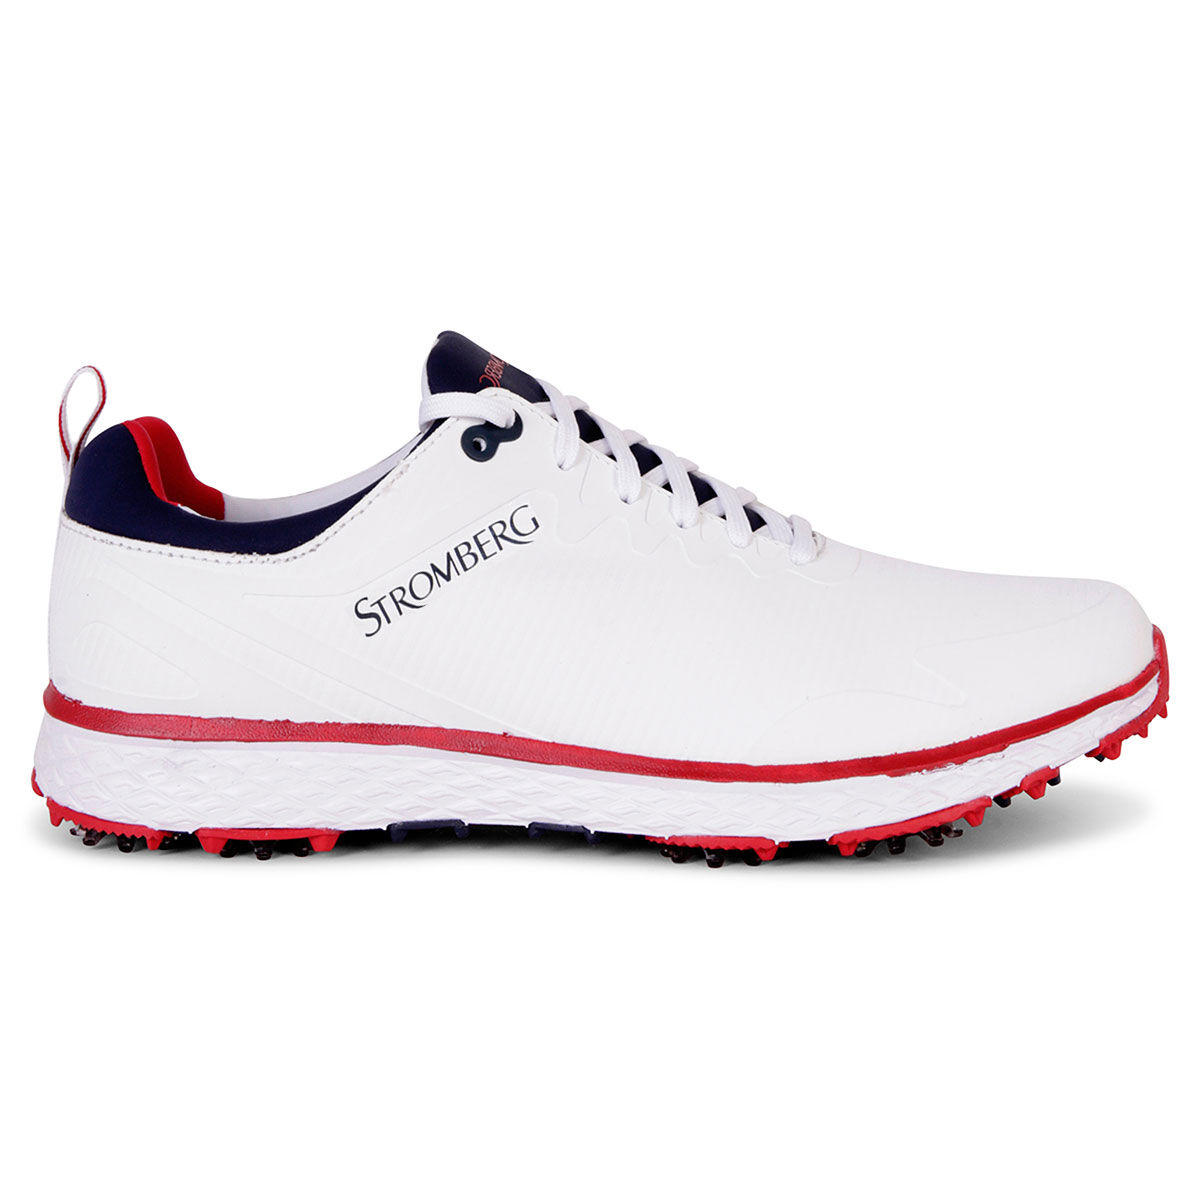 Stromberg Men’s Tempo Waterproof Spiked Golf Shoes, Mens, White/navy/red, 7 | American Golf